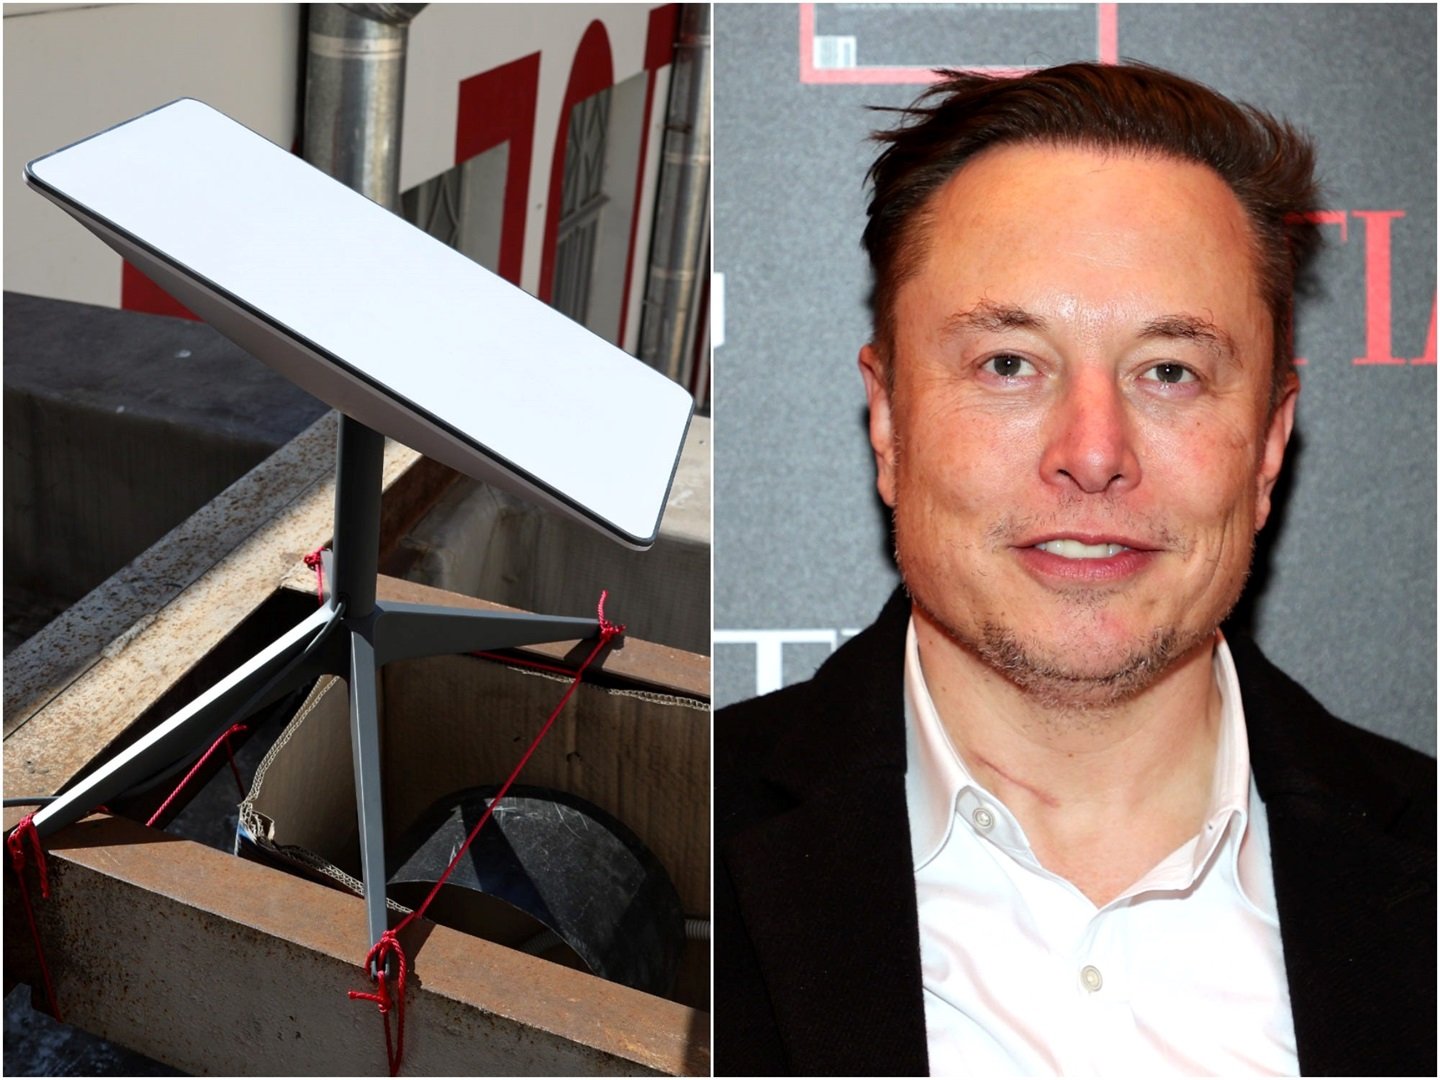 Elon Musk's SpaceX is expanding its Starlink internet service to yachts and cargo ships.